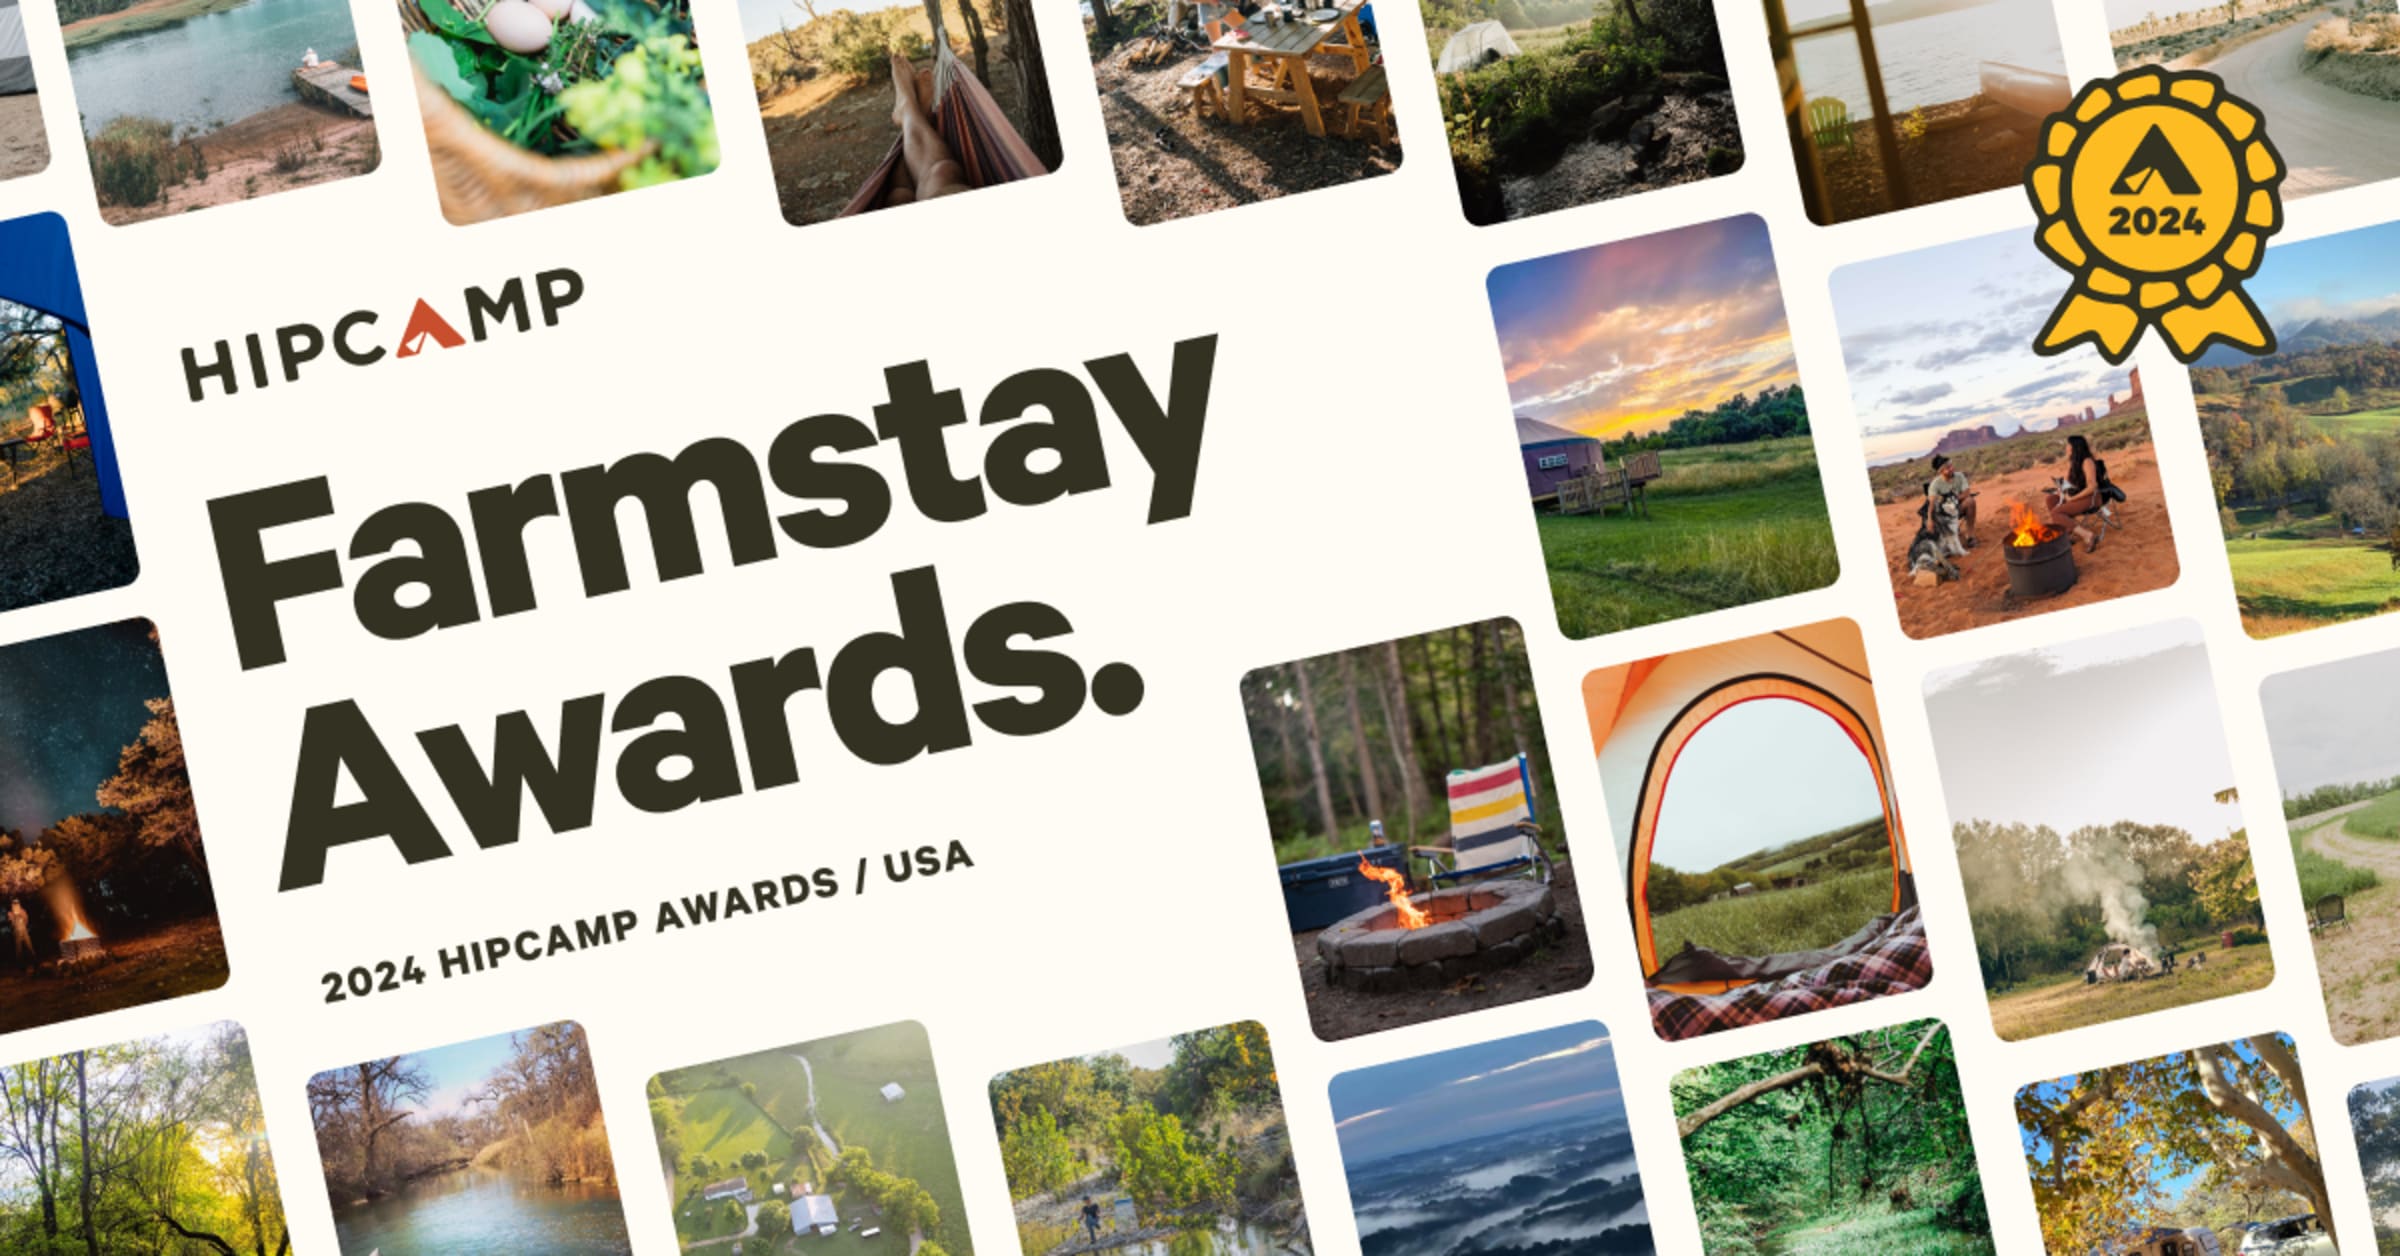 Hipcamp Awards 2024: Best Farmstays in the US